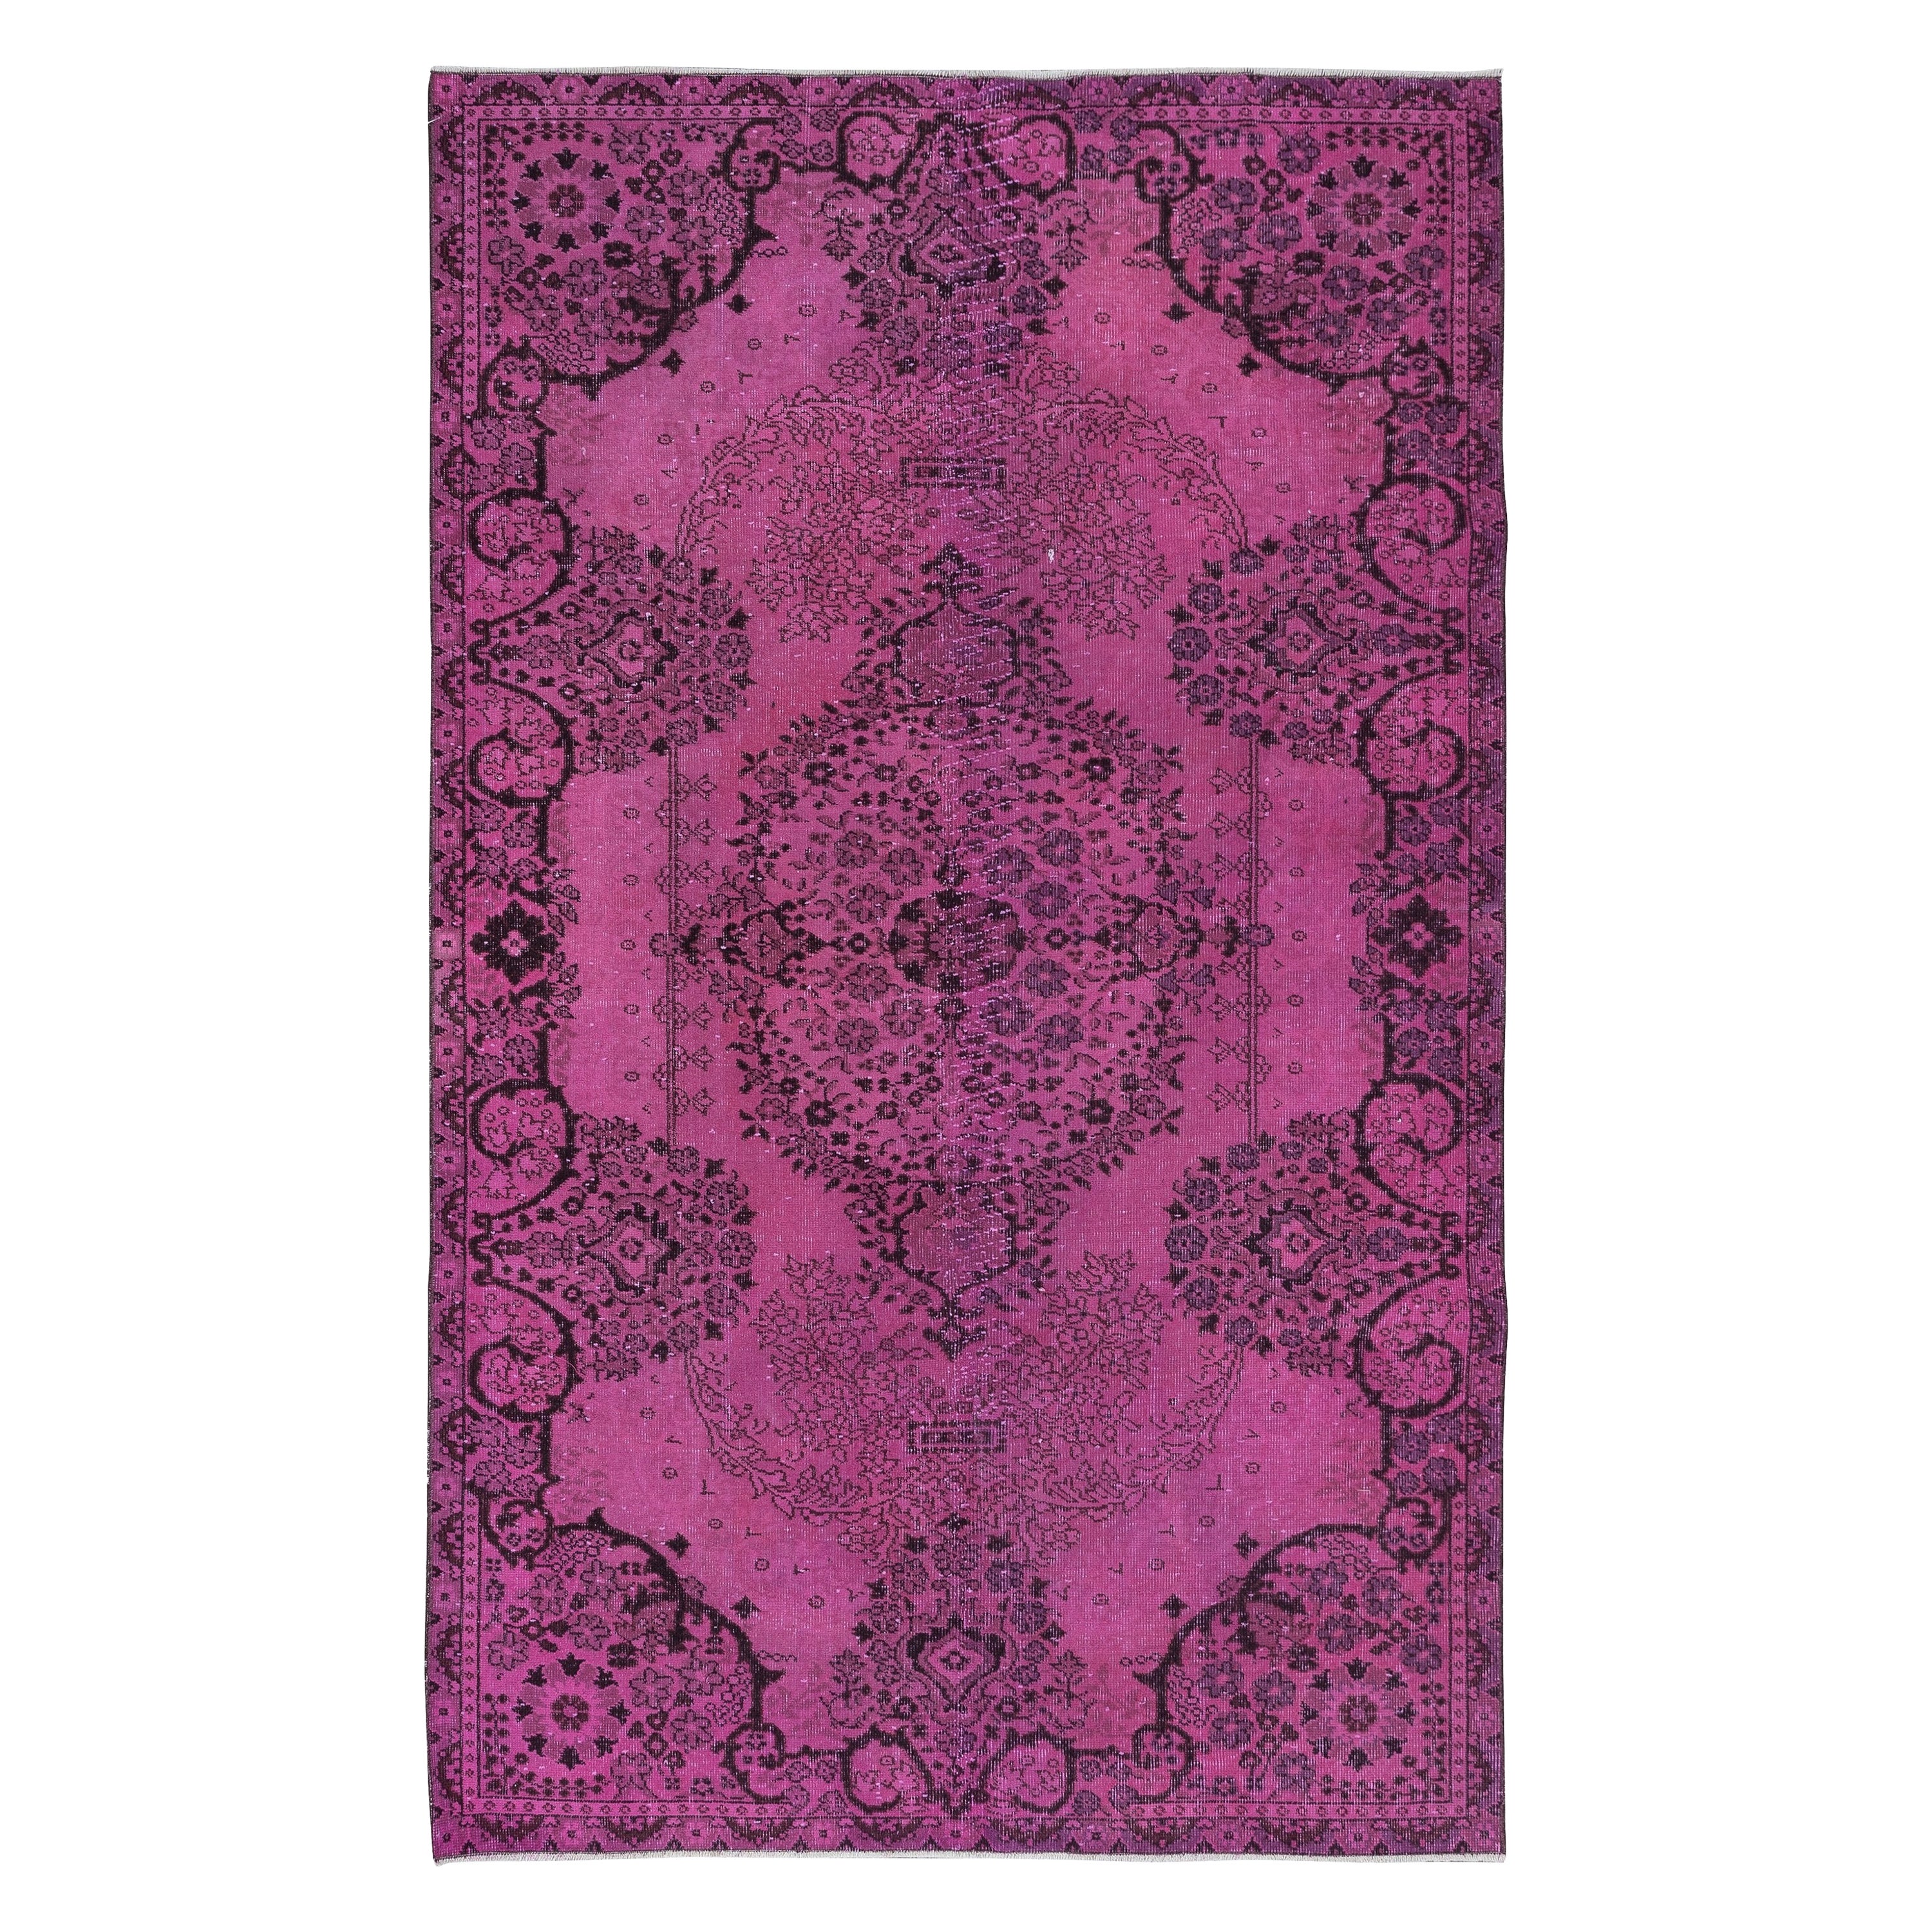 5.3x8.5 Ft Decorative Pink Area Rug for Modern Interiors, Handknotted in Turkey